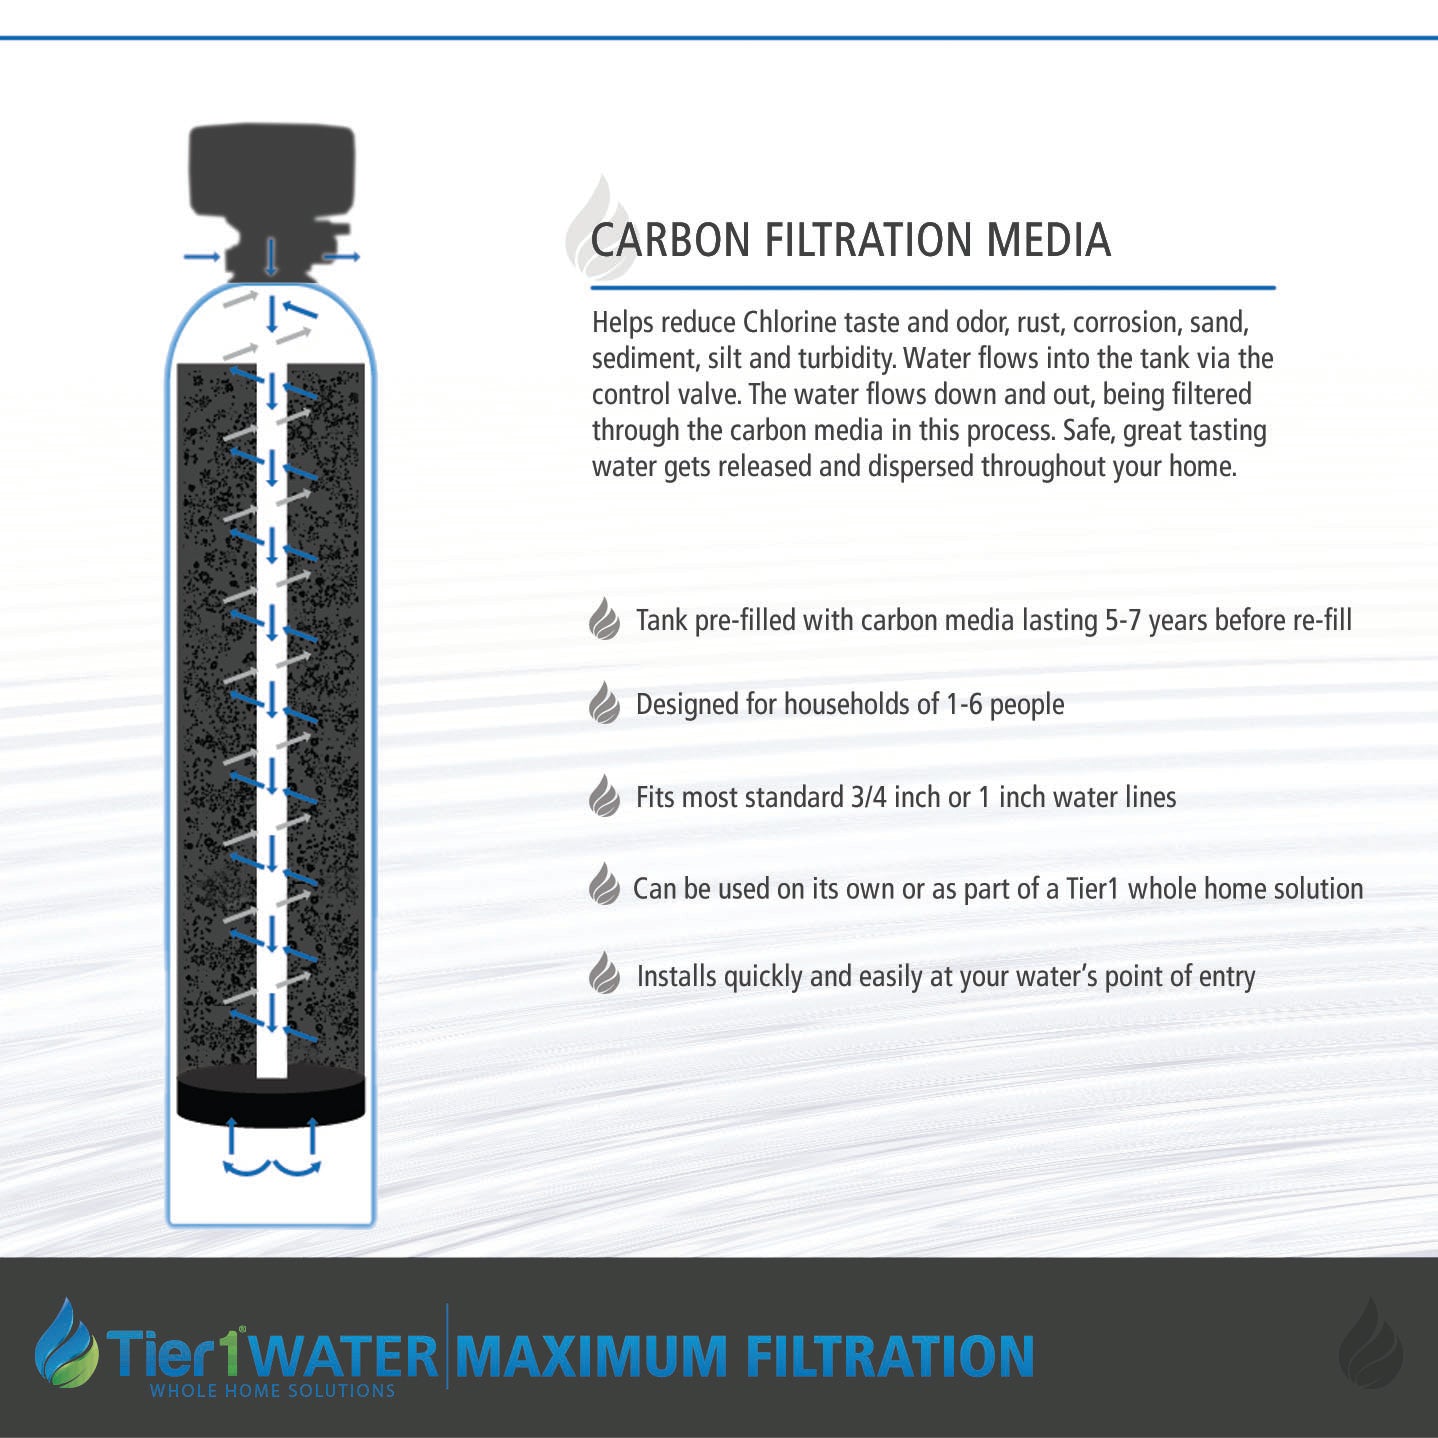 Series 10000 Tier1 Whole Home Backwashing Carbon Filter System (Maximum Filtration)